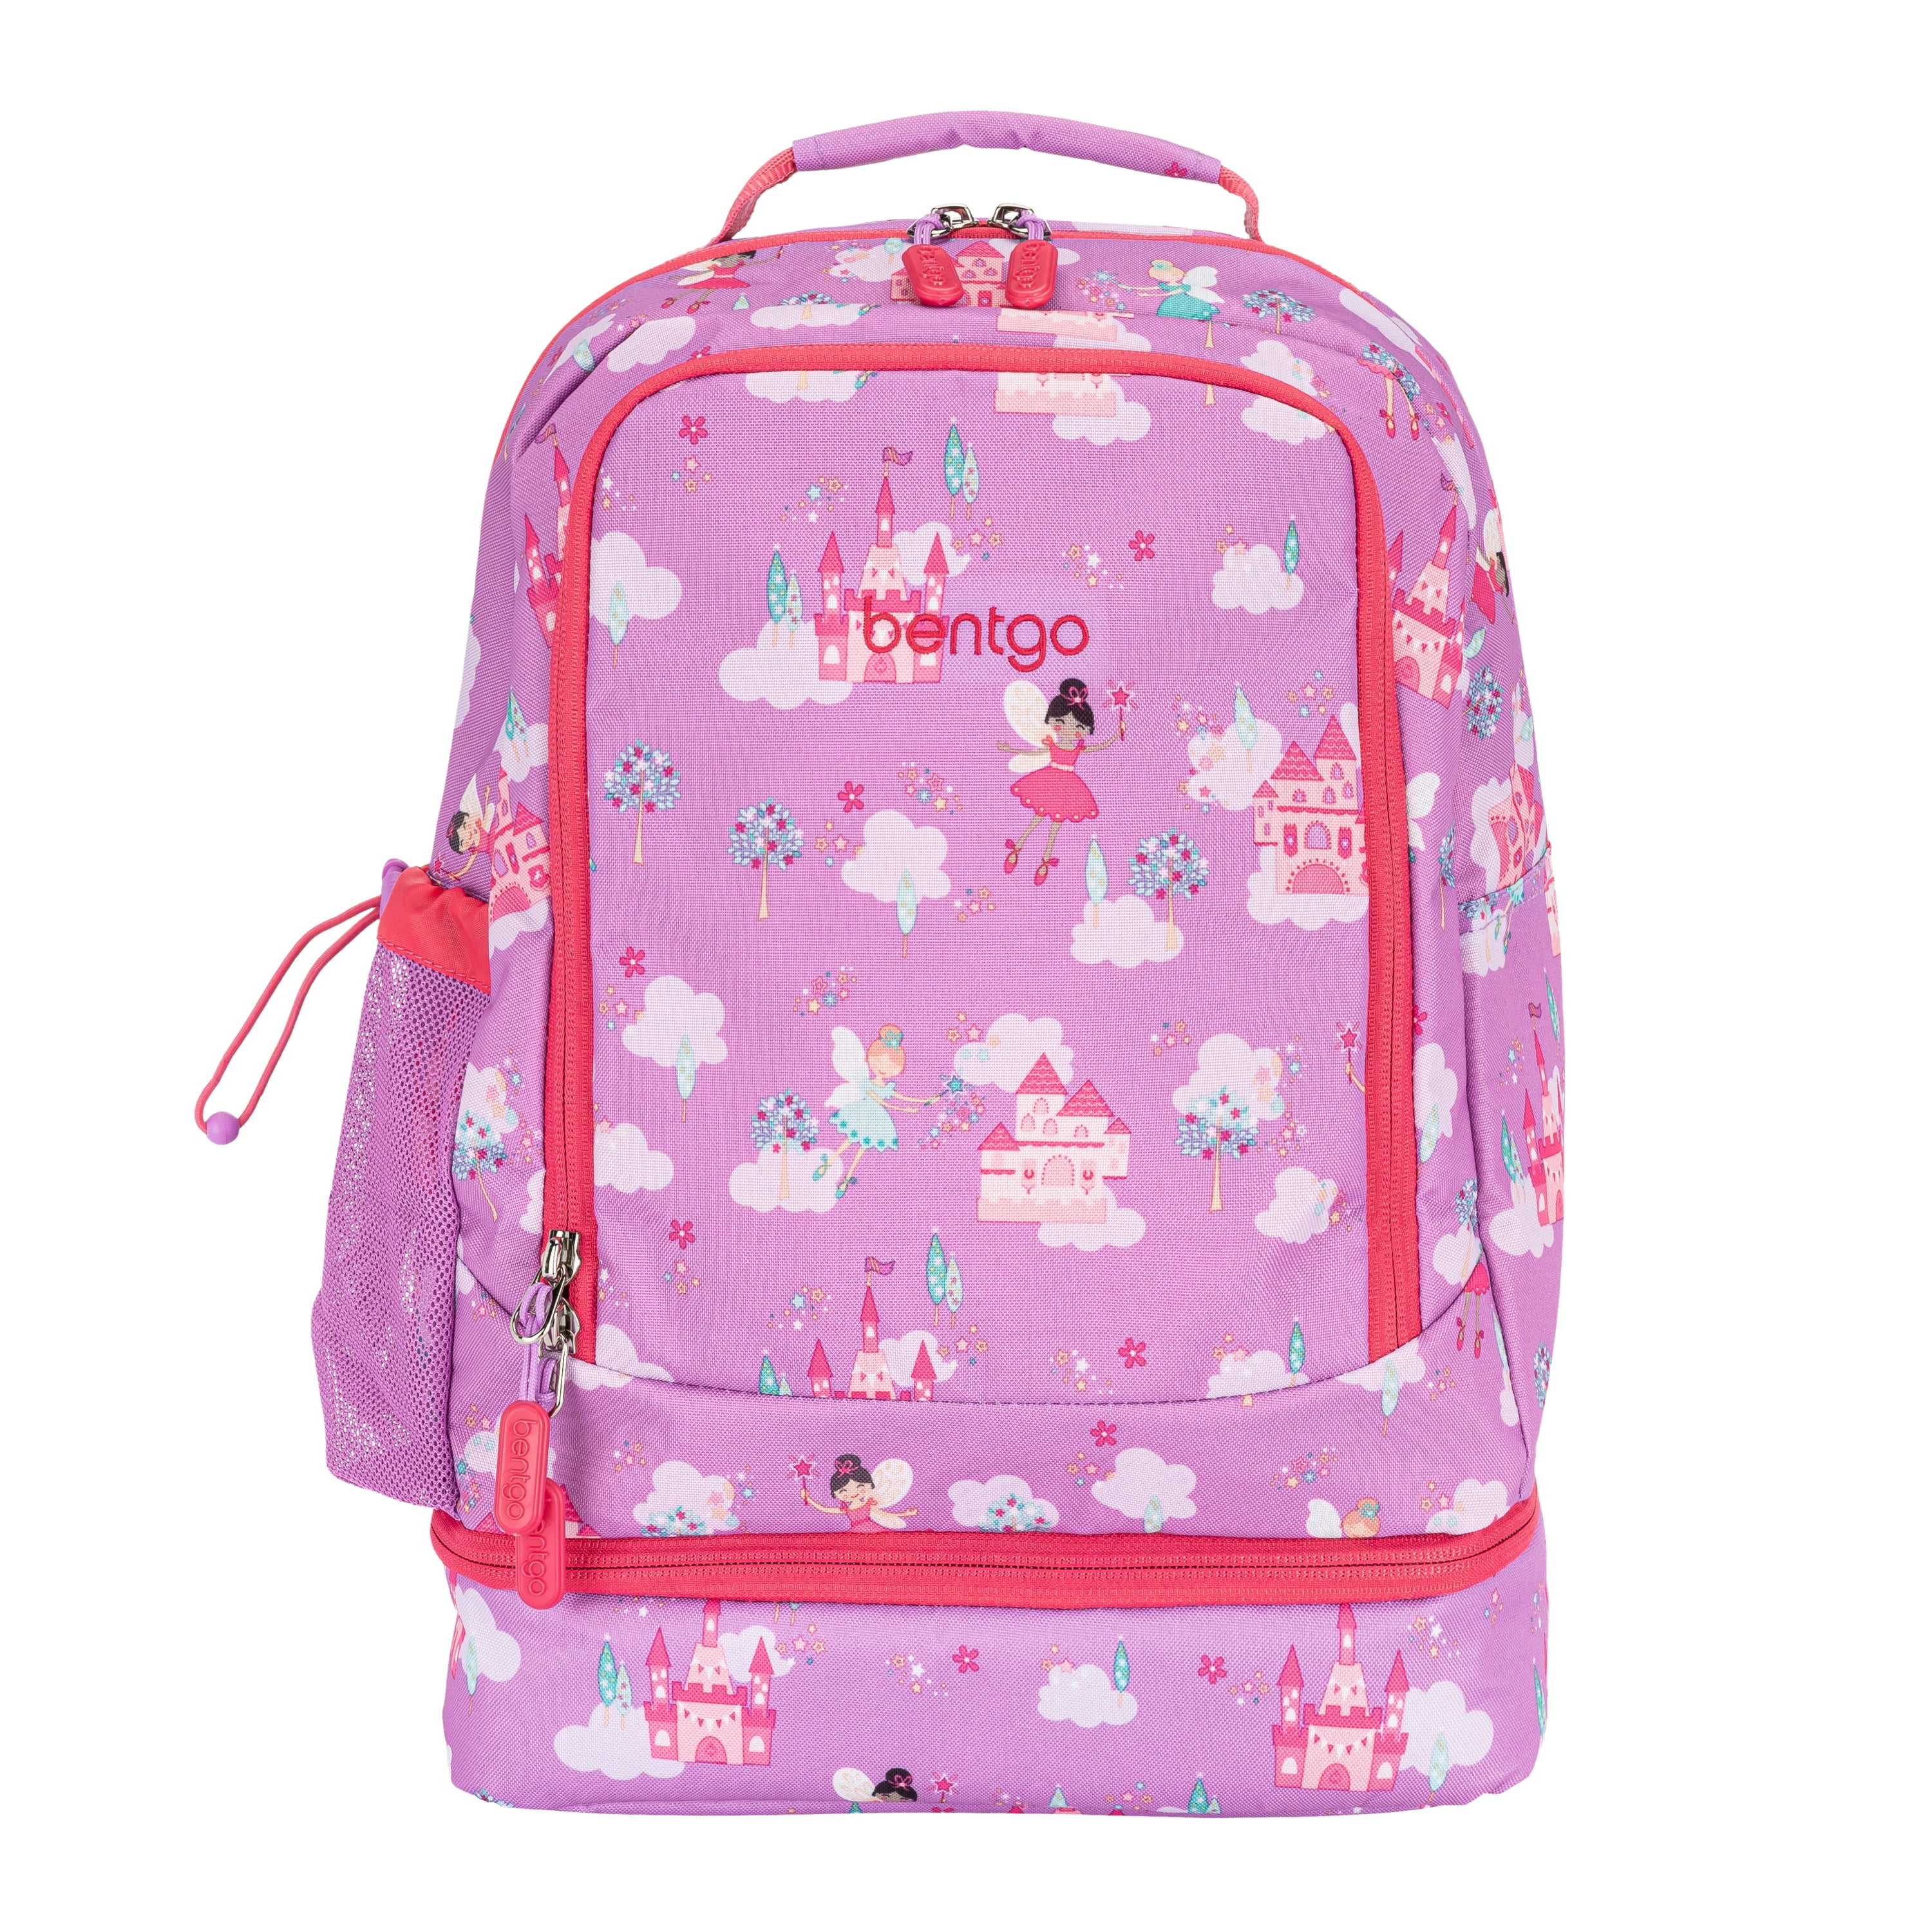  Beauty Collector Personalized Piano Music Prints Backpack Set  for Girls Boys Cute Book Bag with Lunchbag and Pencil Case